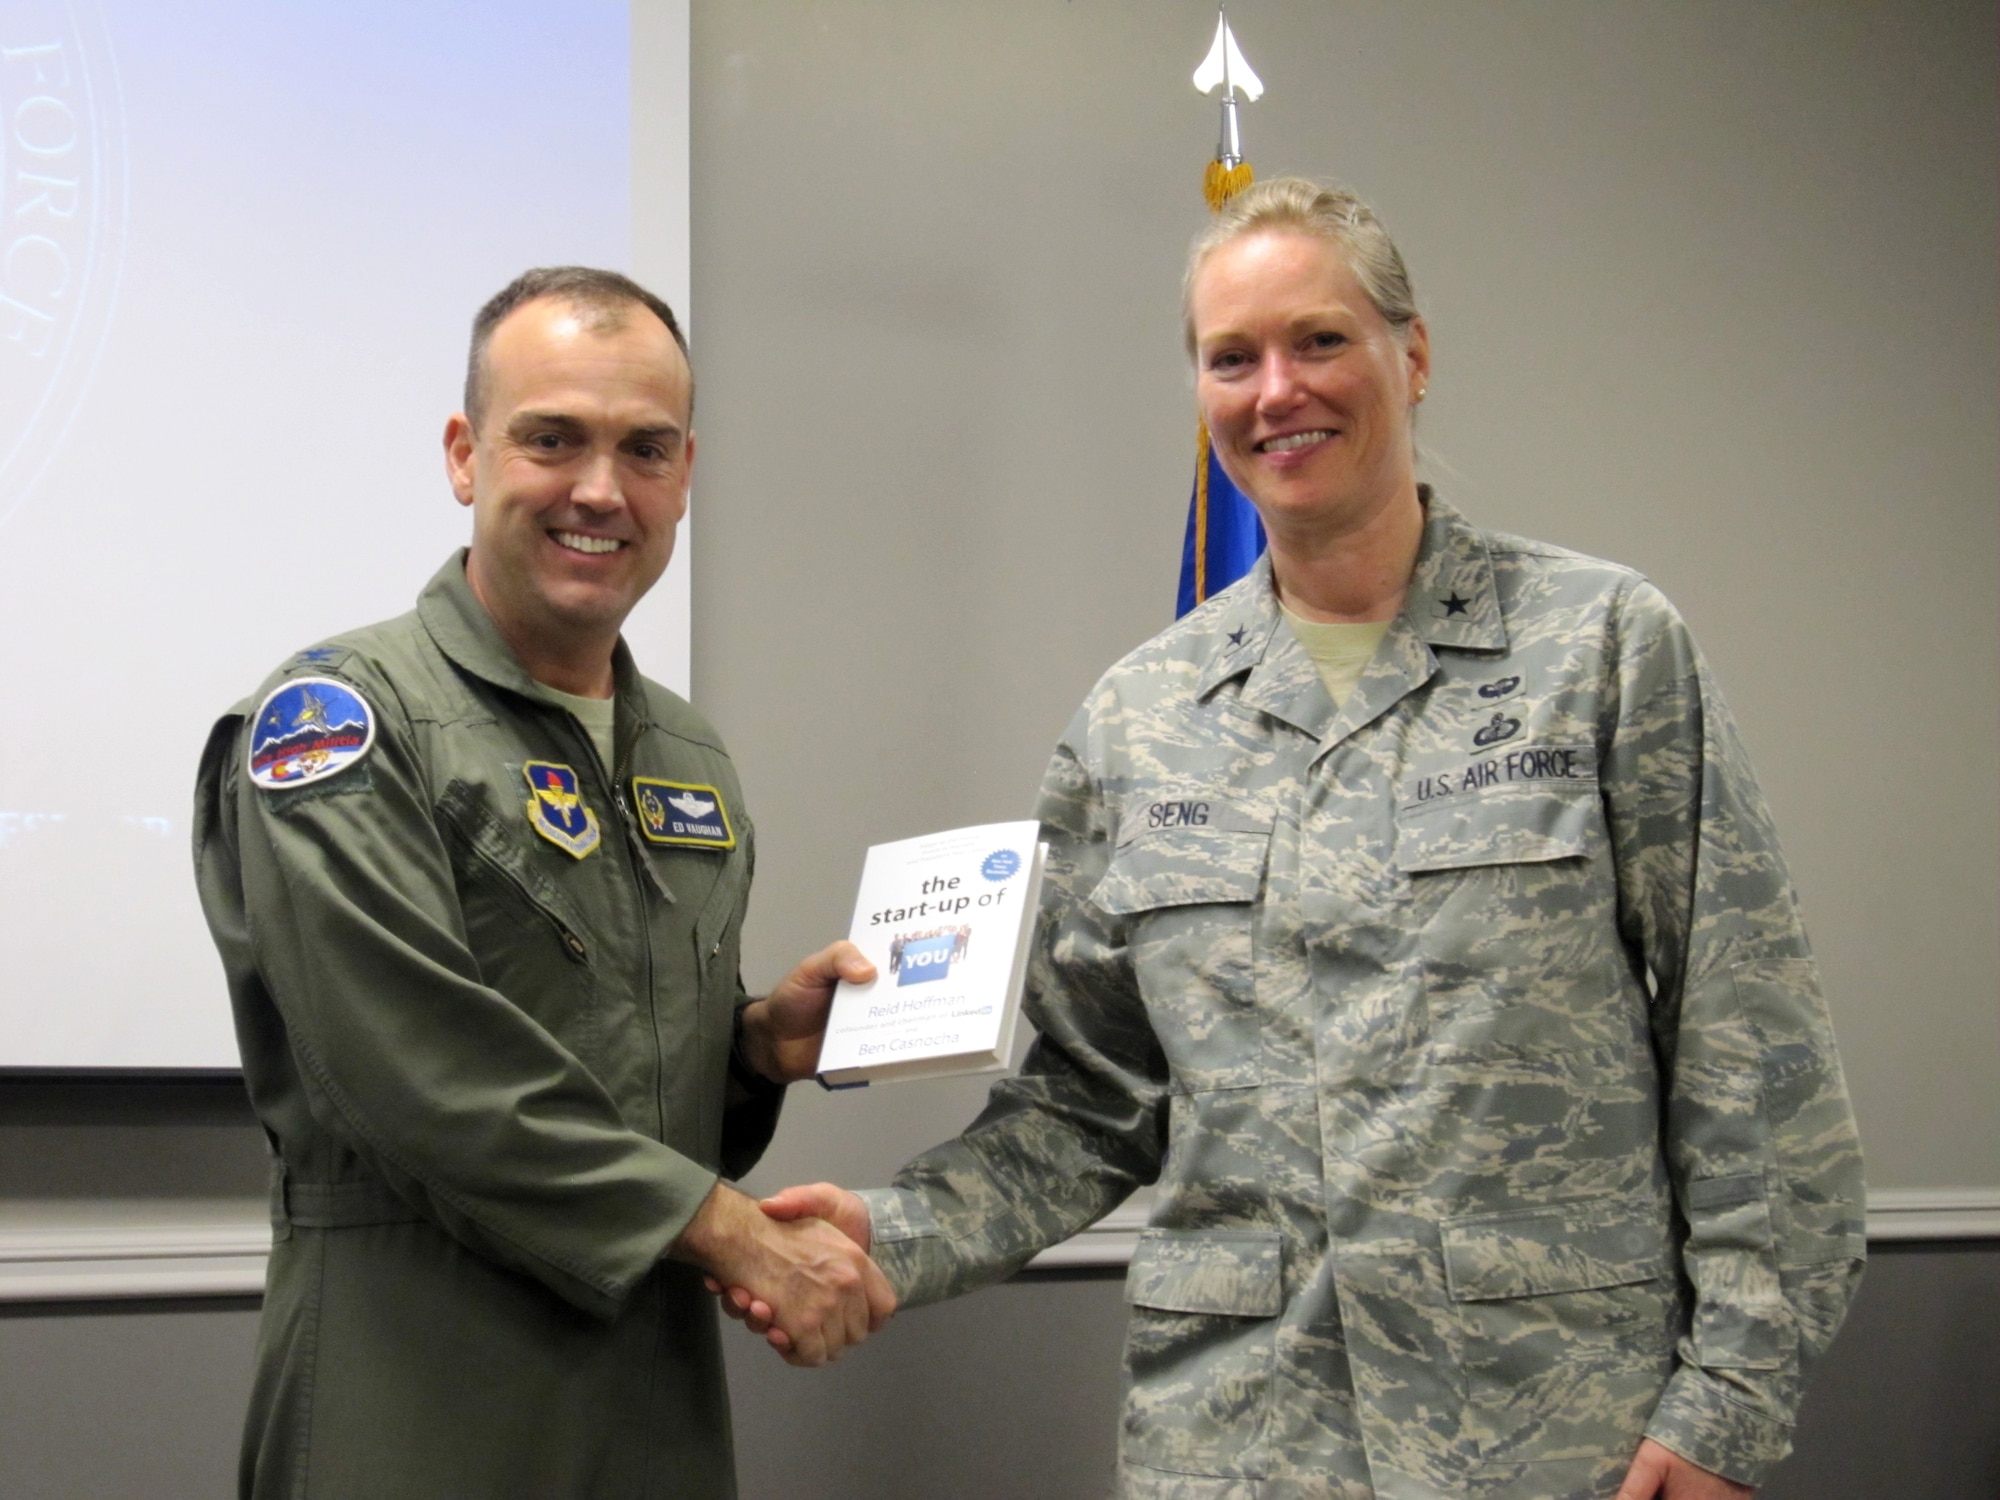 Colonel Edward Vaughan, Air National Guard adviser to the commander and president of the Air University and co-founder of GARNET, presents “The Startup of You,” a professional networking book, to Brig. Gen. Jocelyn Seng, mobilization assistant to the commander and president of the Air University, following her GARNET talk at Air War College in April at Maxwell Air Force Base, Ala. (U.S. Air Force photo by Lt. Col. Patricia York)